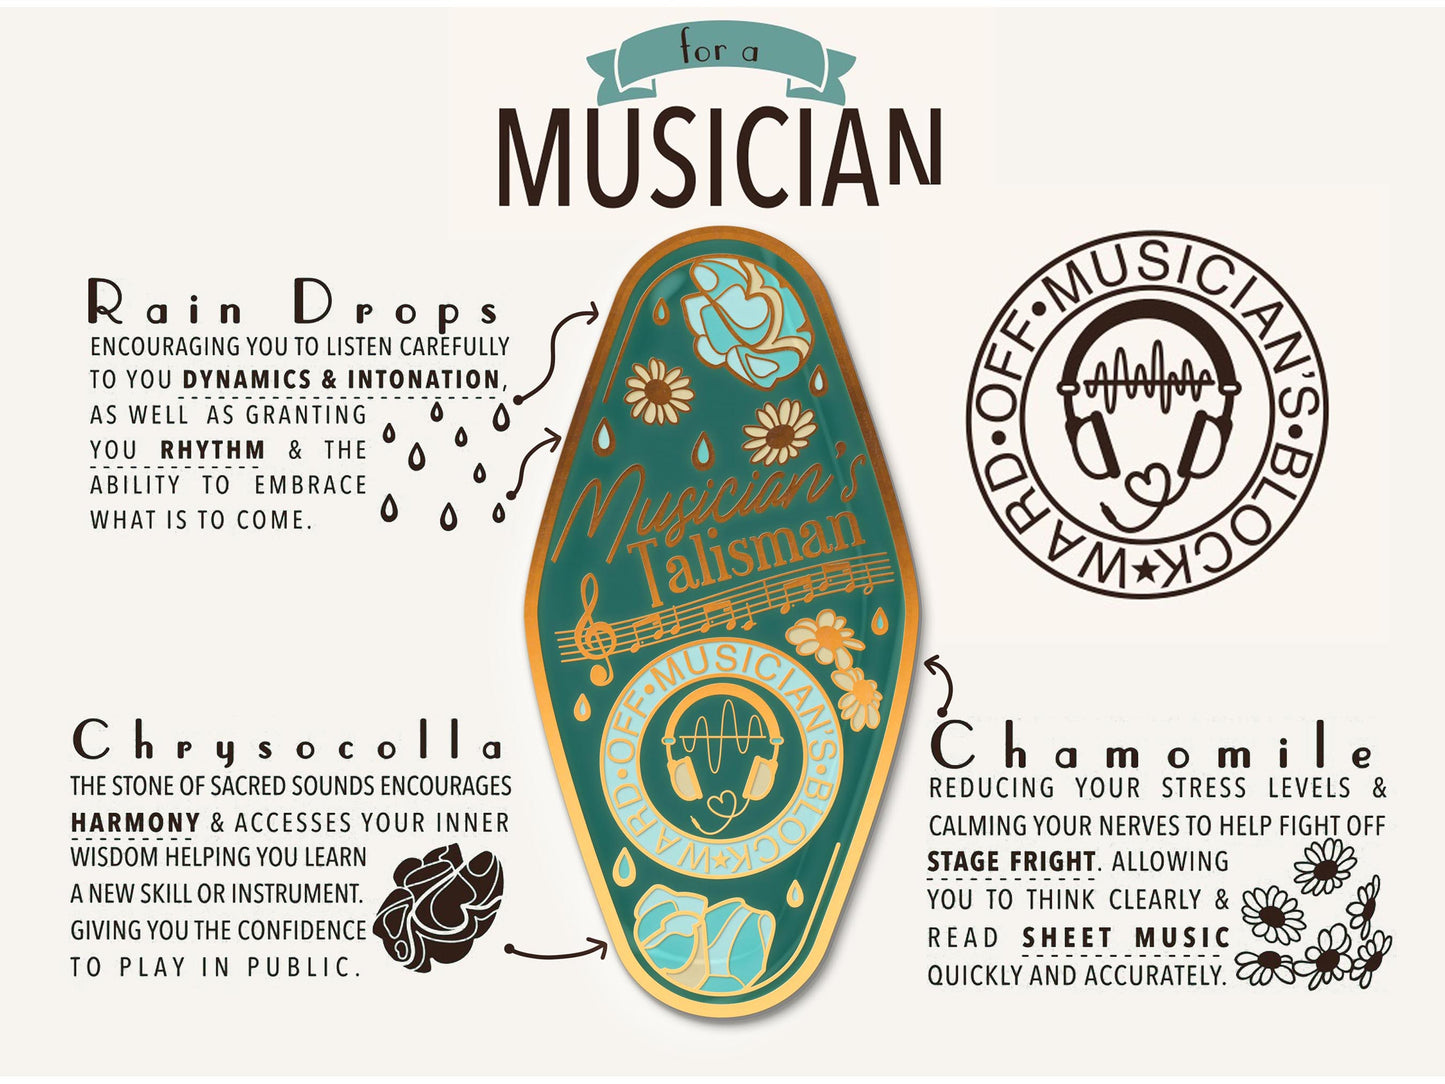 A illustrated diagram outline the symbolism of the different design elements of the for a Musician's Talisman pin. Information includes the meaning of the rain drops, chrysocolla, and chamomile